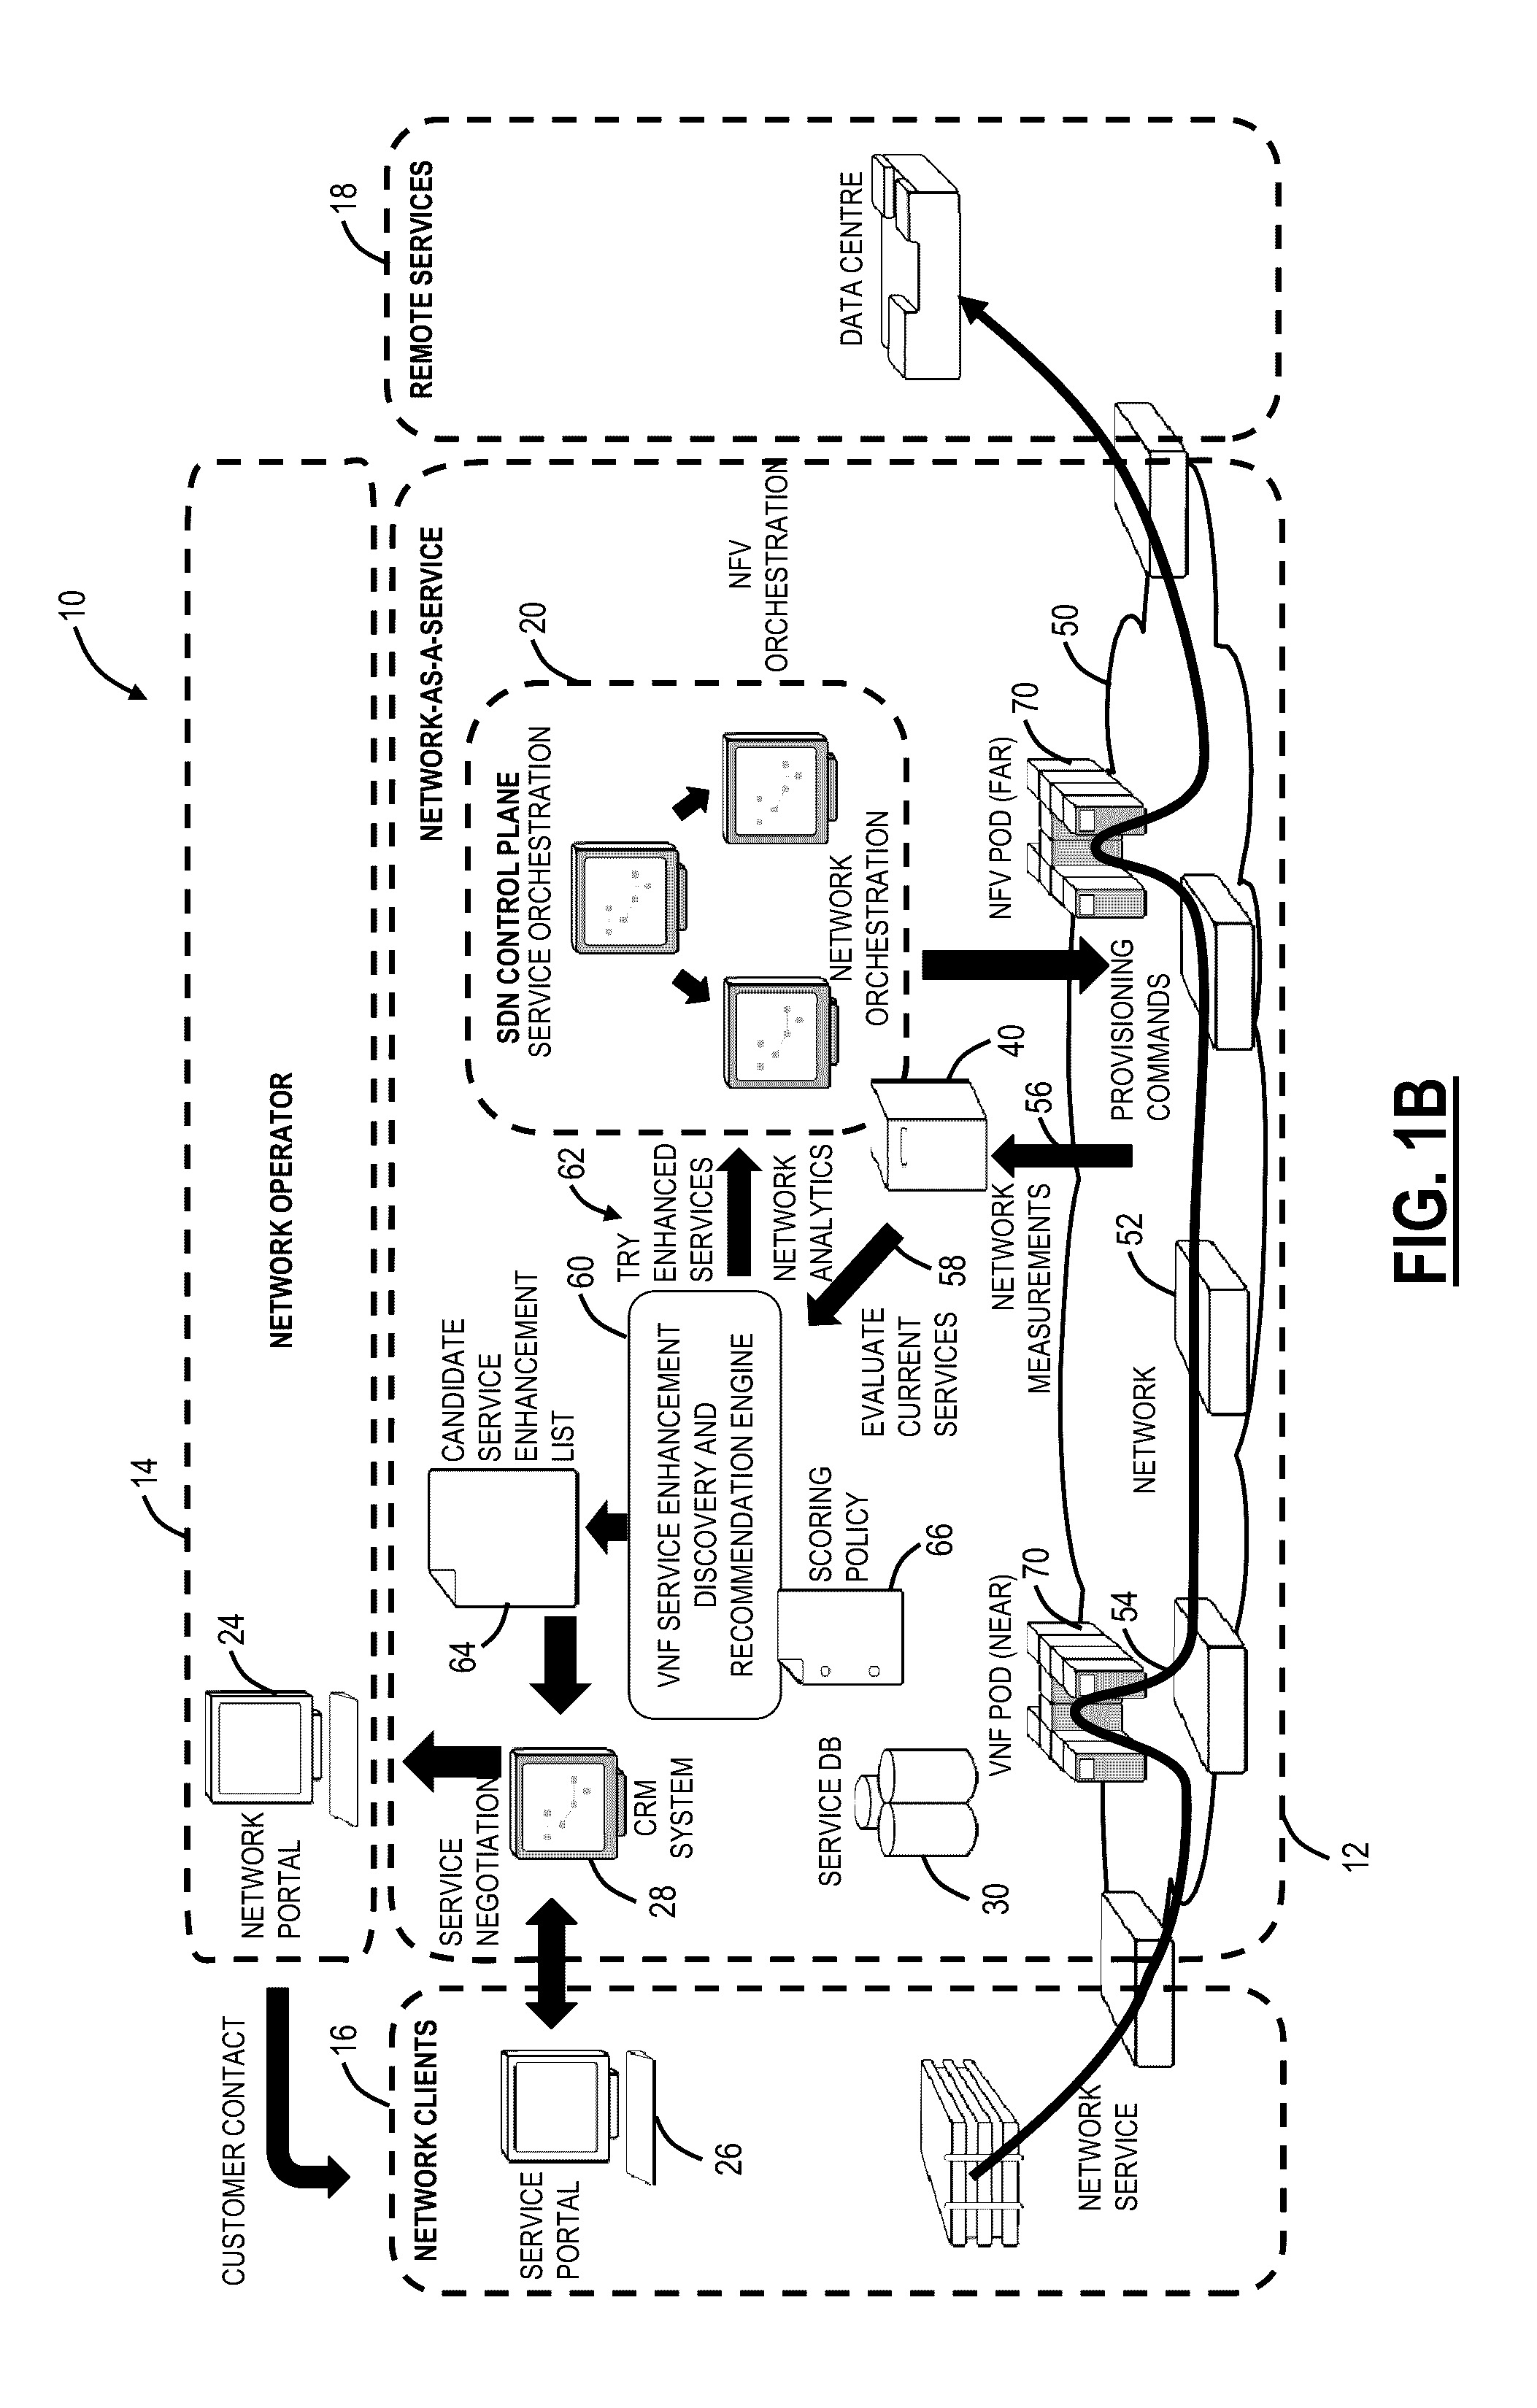 Service enhancement discovery for connectivity traits and virtual network functions in network services